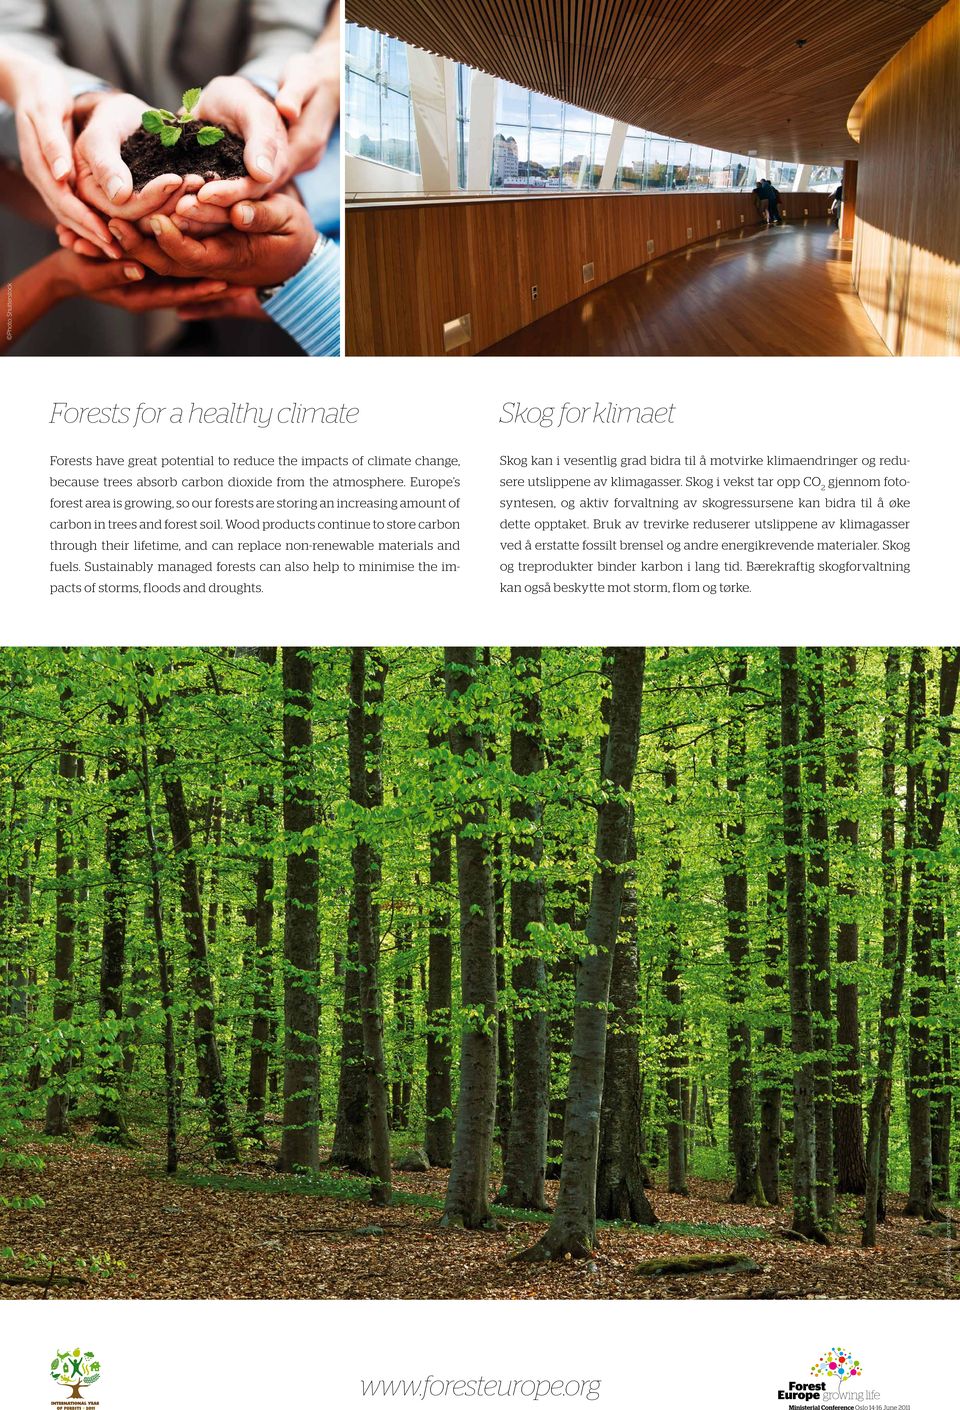 Wood products continue to store carbon through their lifetime, and can replace non-renewable materials and fuels.